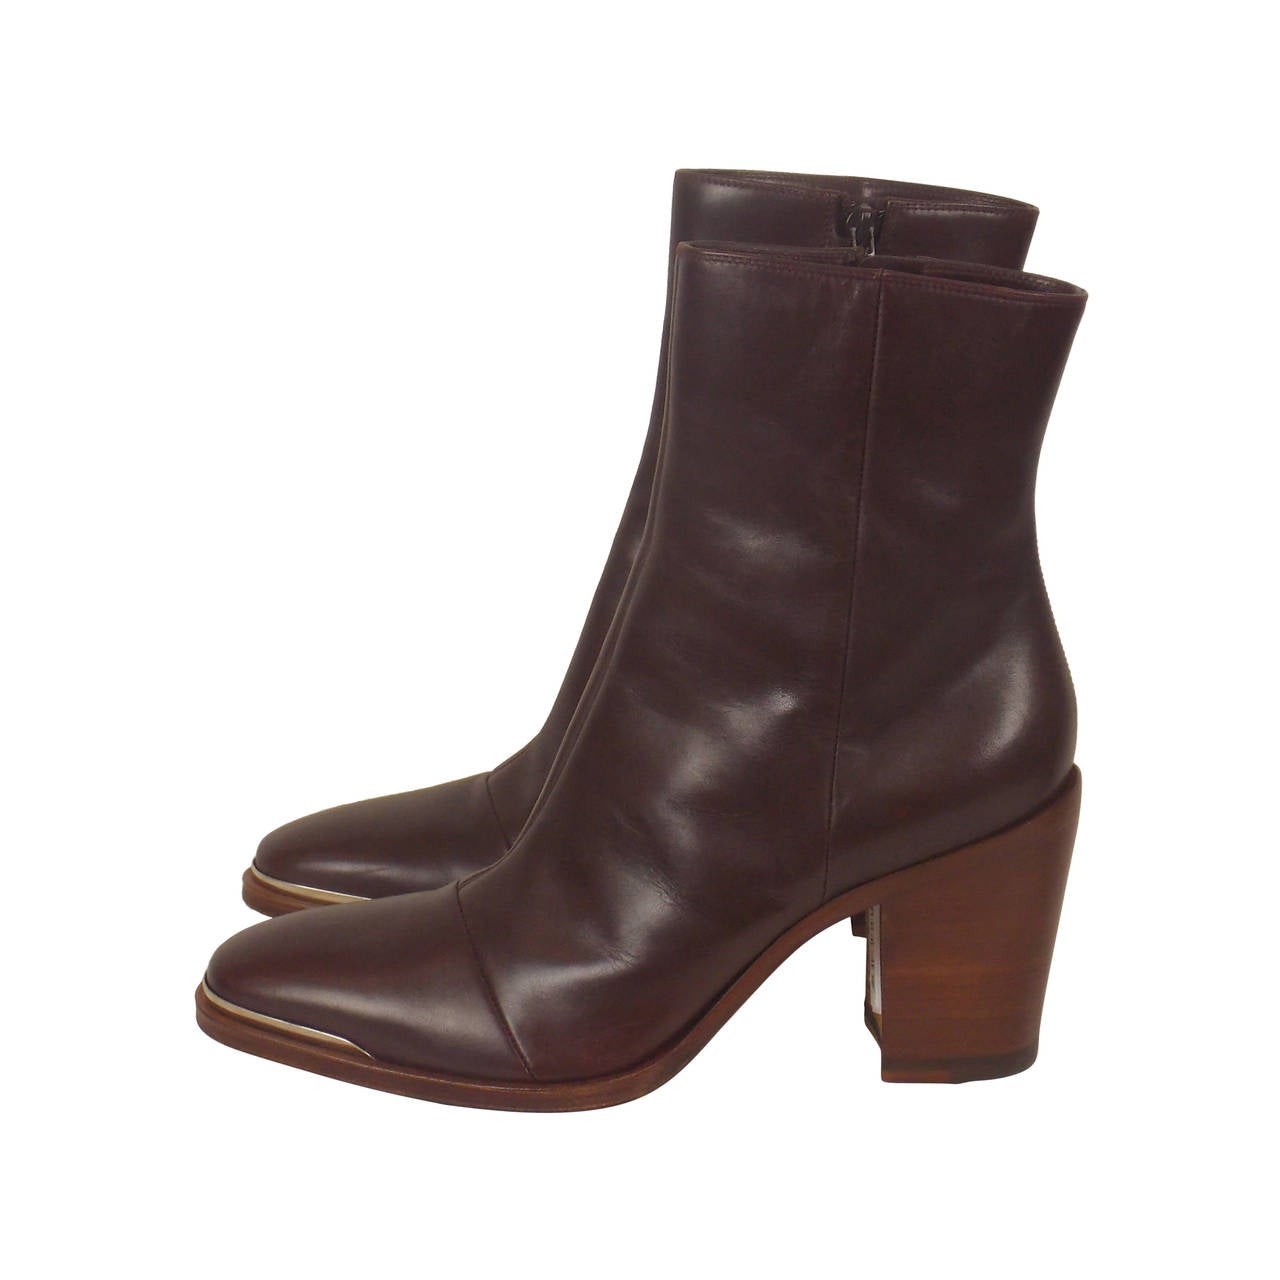 Celine Brown Leather Ankle Booties